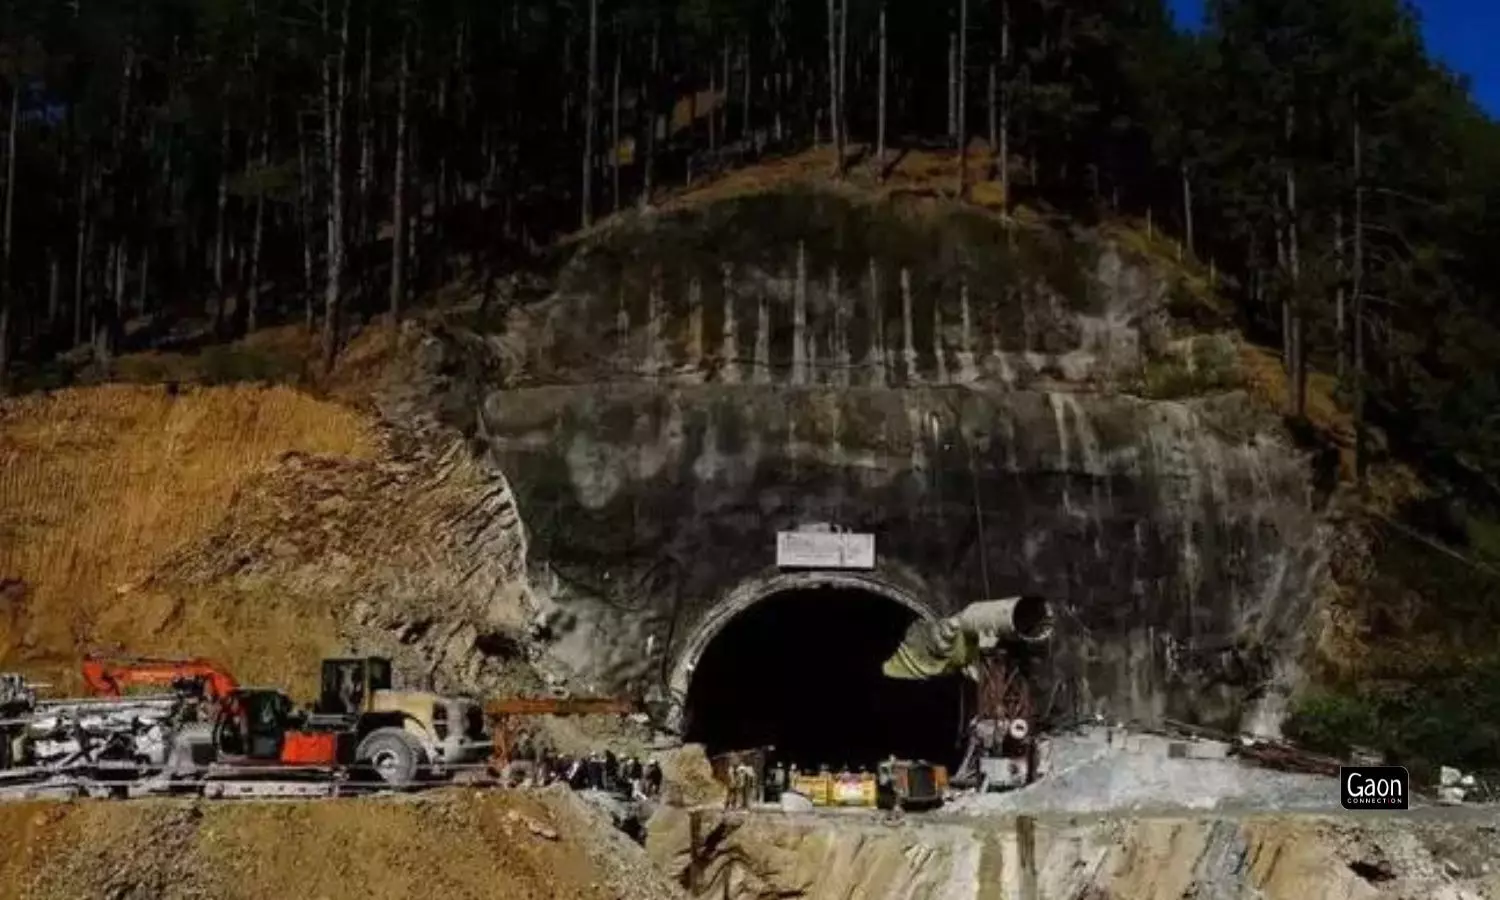 Uttarakhand Tunnel: Mechanised Drilling Stopped, Workers to be Rescued Shortly